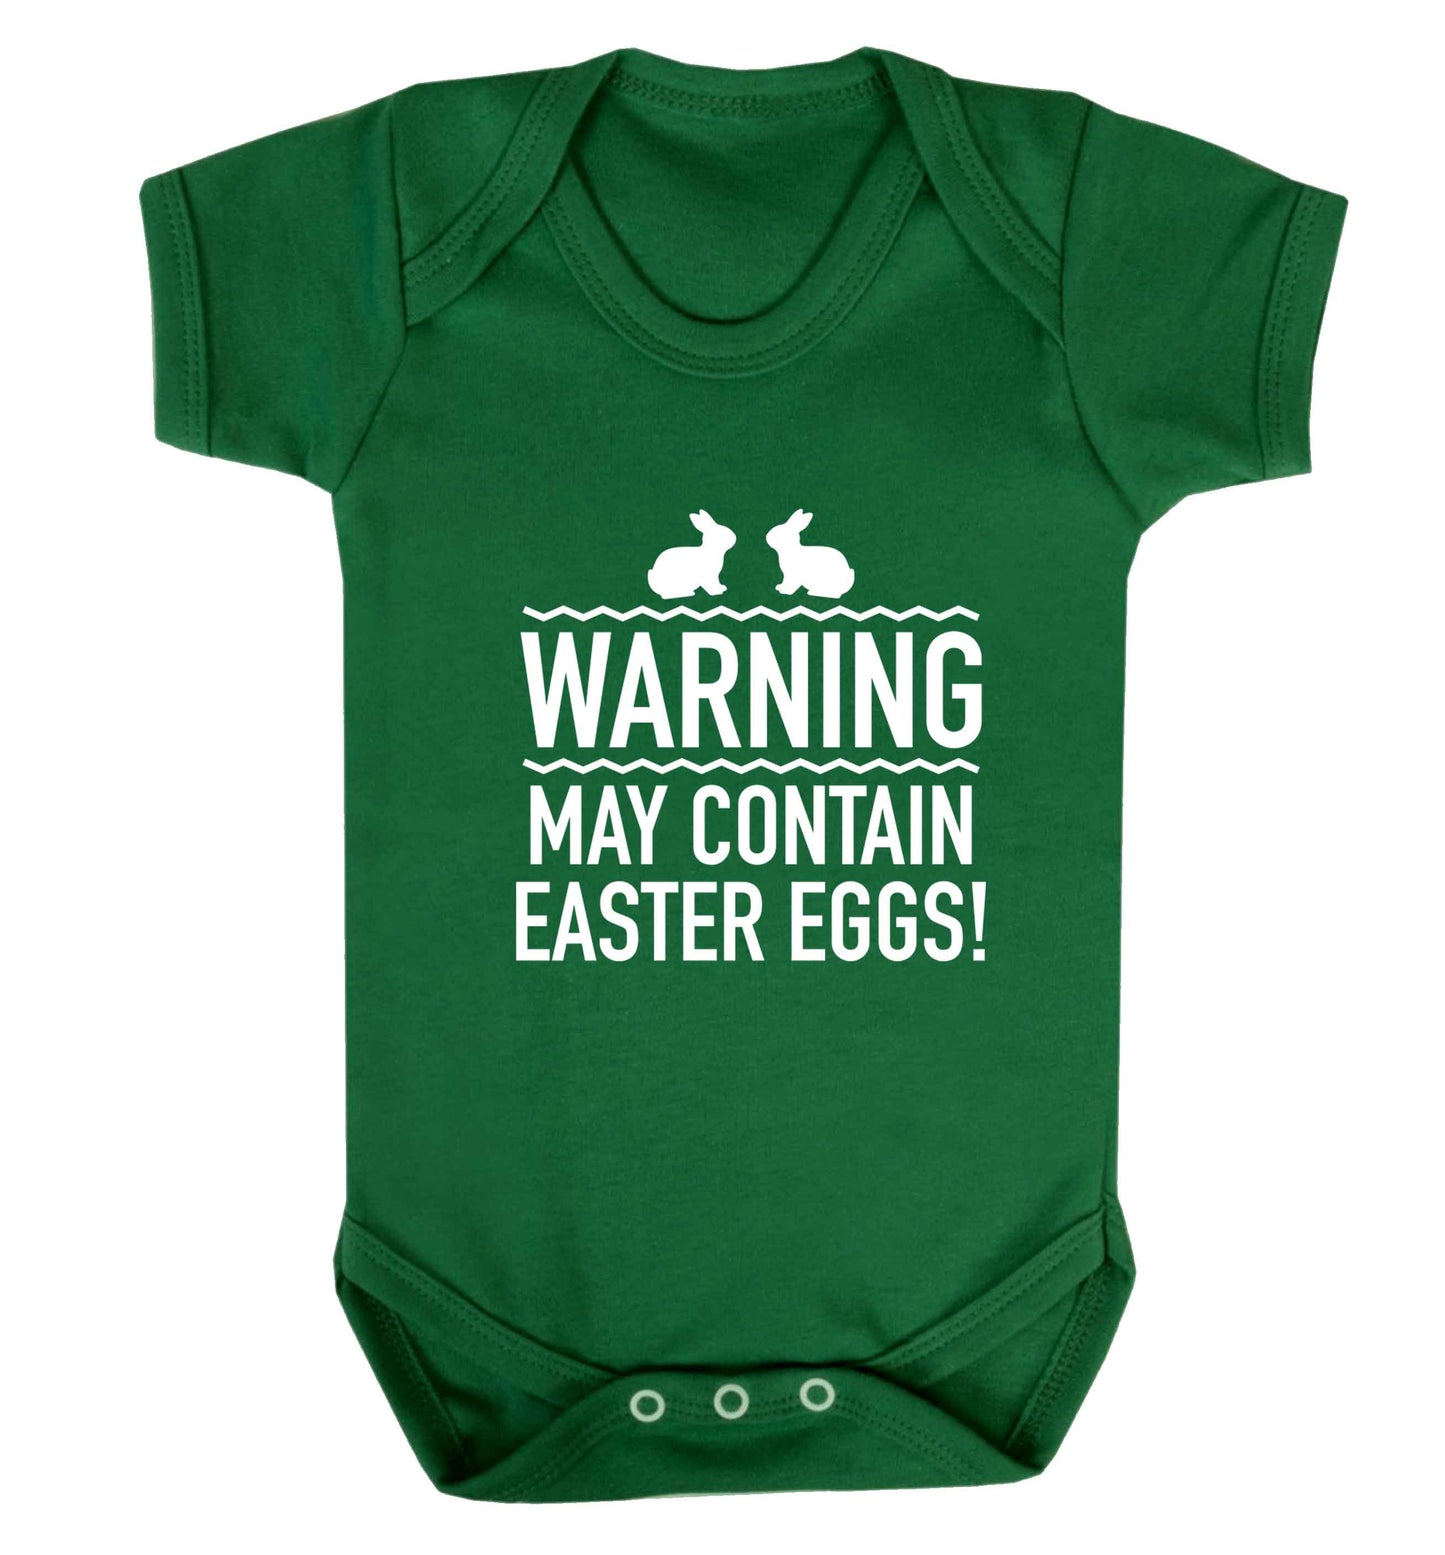 Warning may contain Easter eggs baby vest green 18-24 months